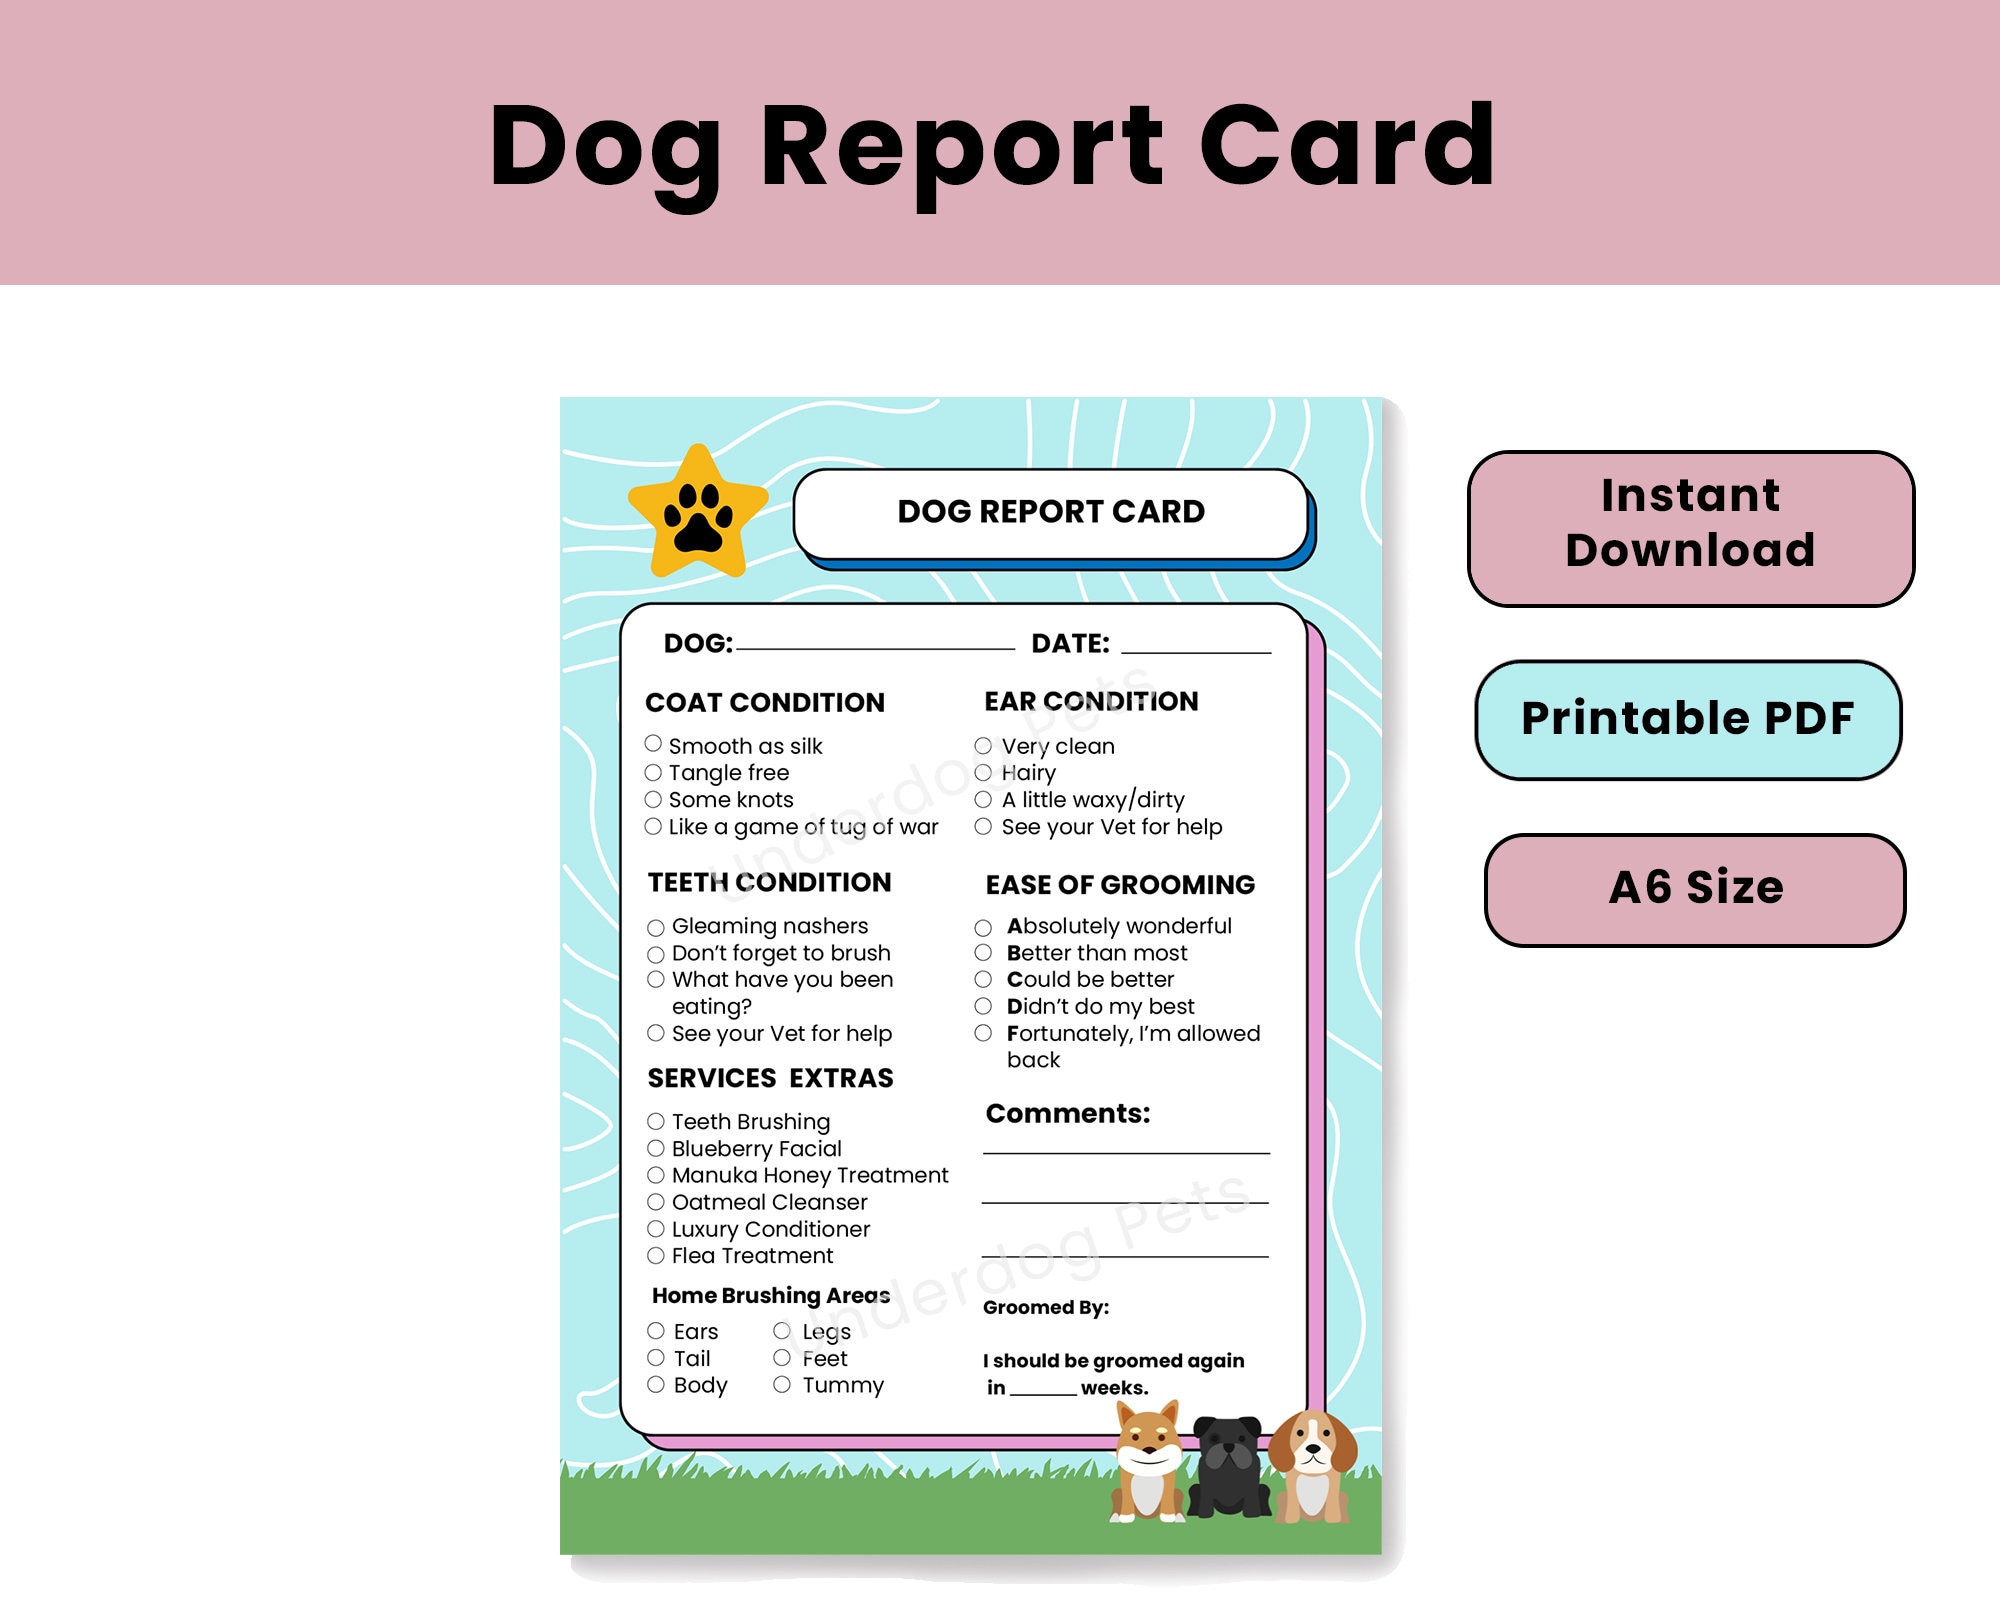 dog-report-card-for-groomers-dog-groomer-form-mobile-pet-etsy